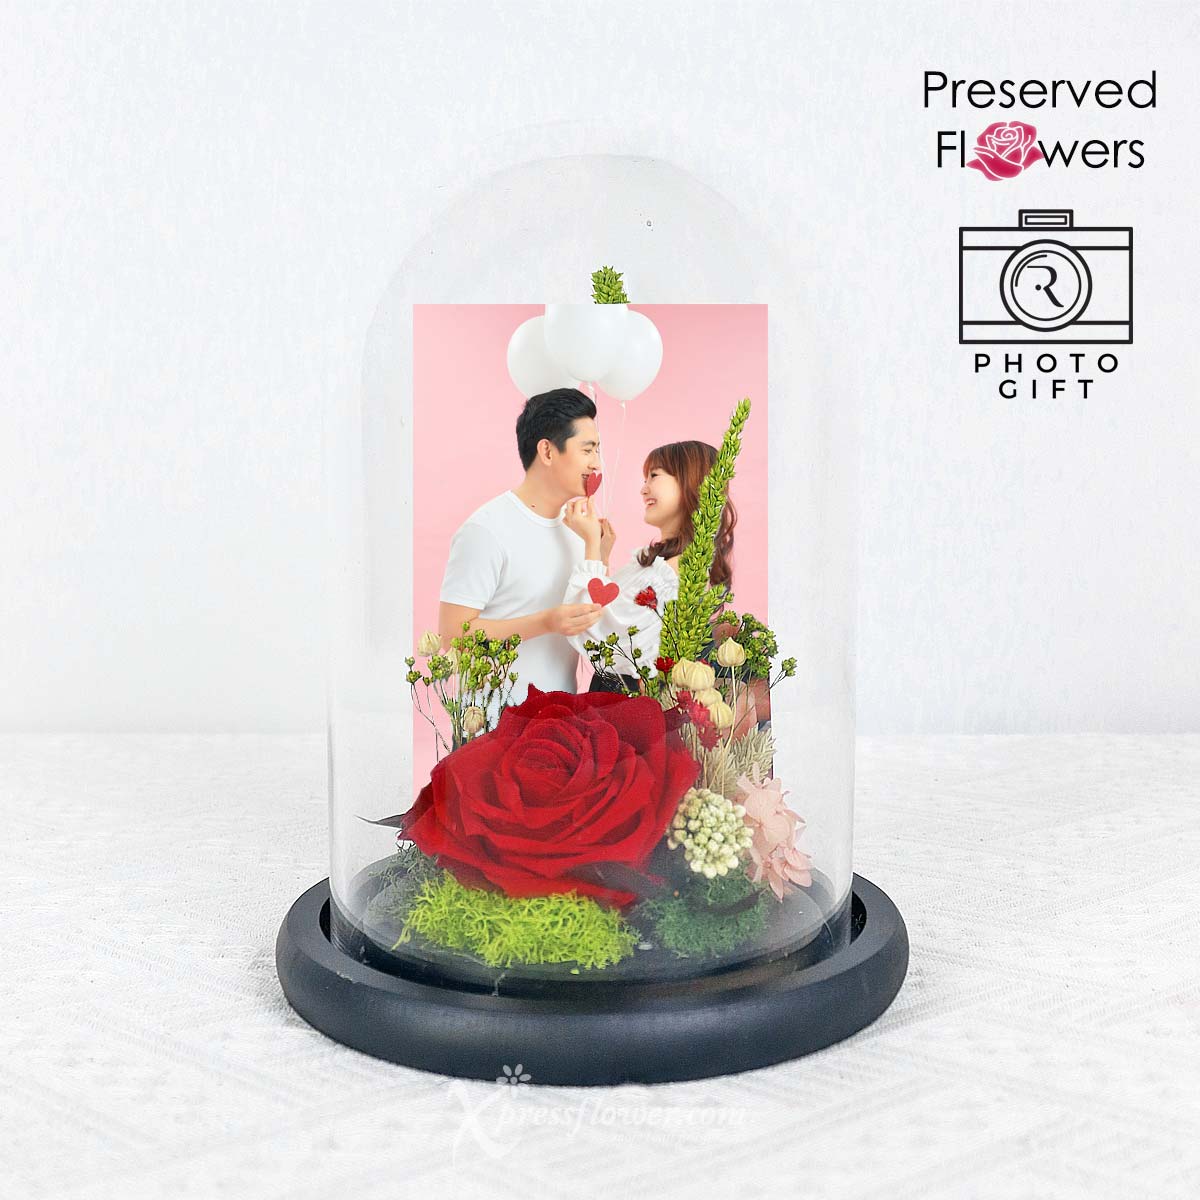 Classic Ethereal (Preserved Flowers with Personalised Photo)